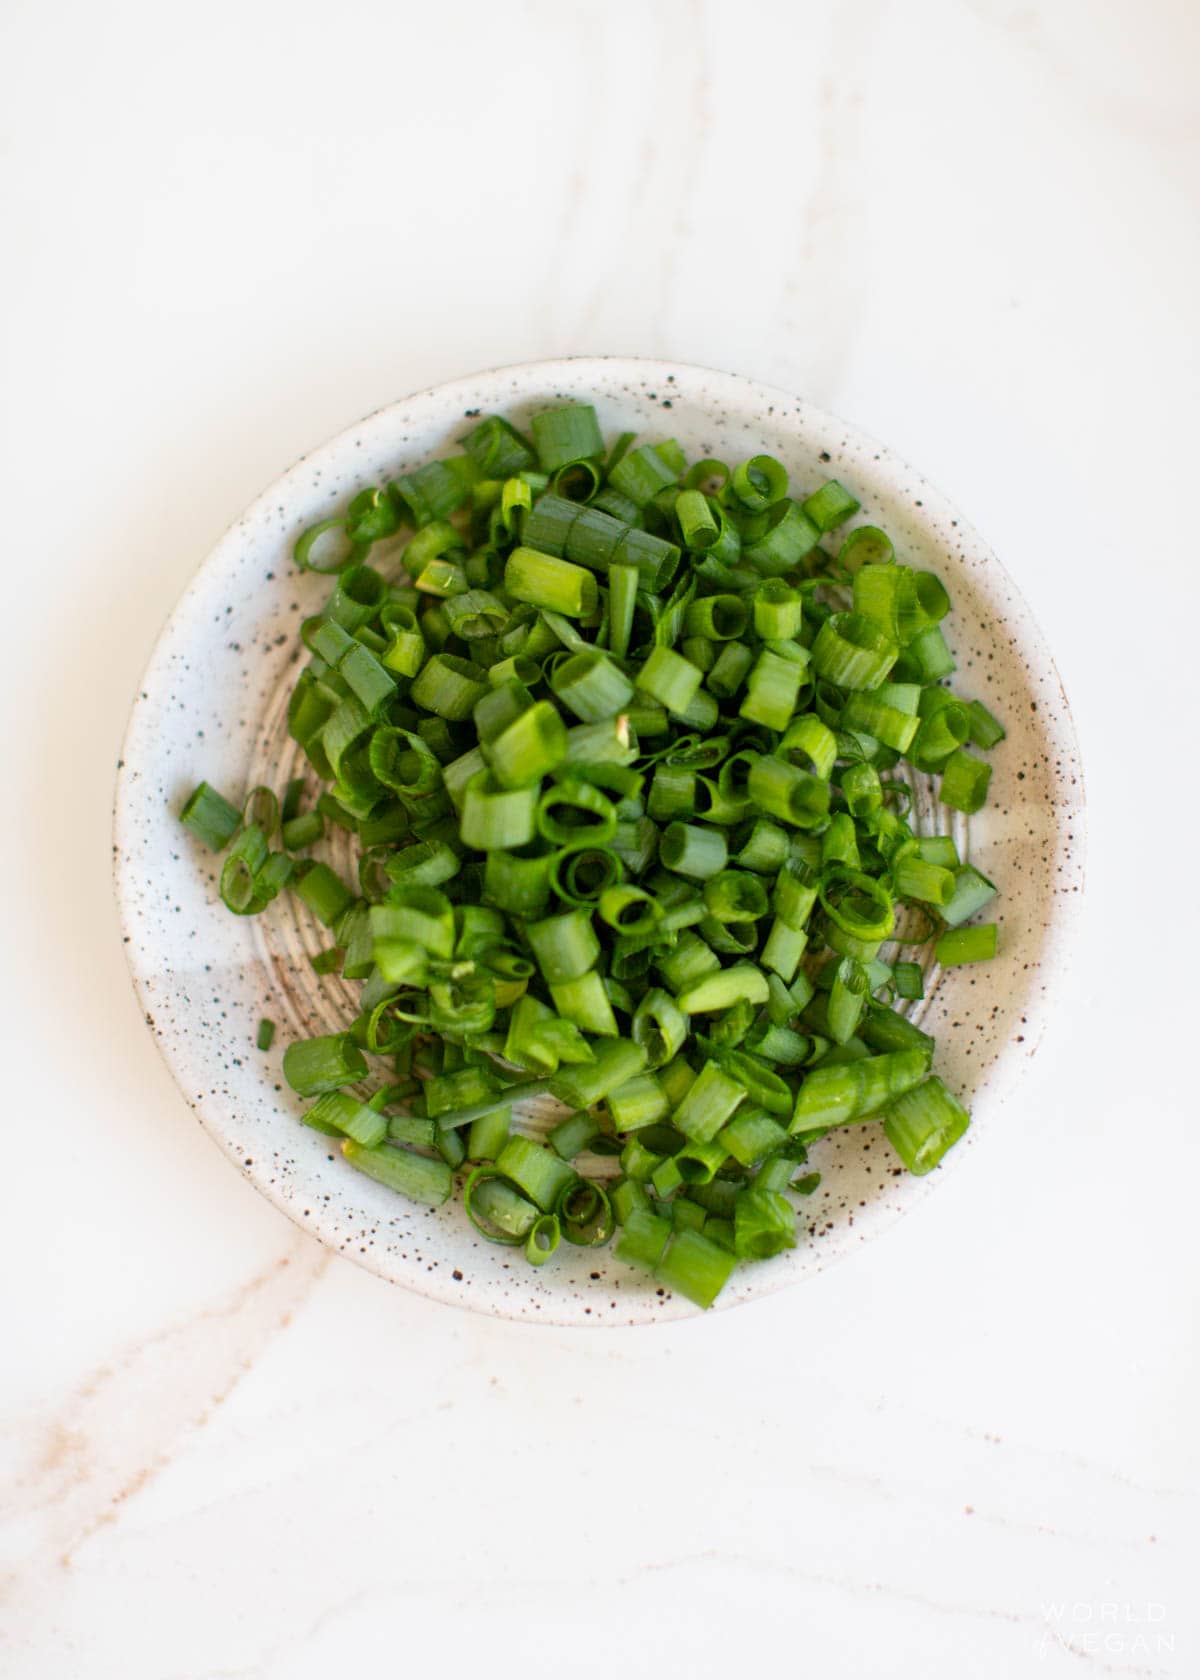 Sliced green onion in a small bowl.